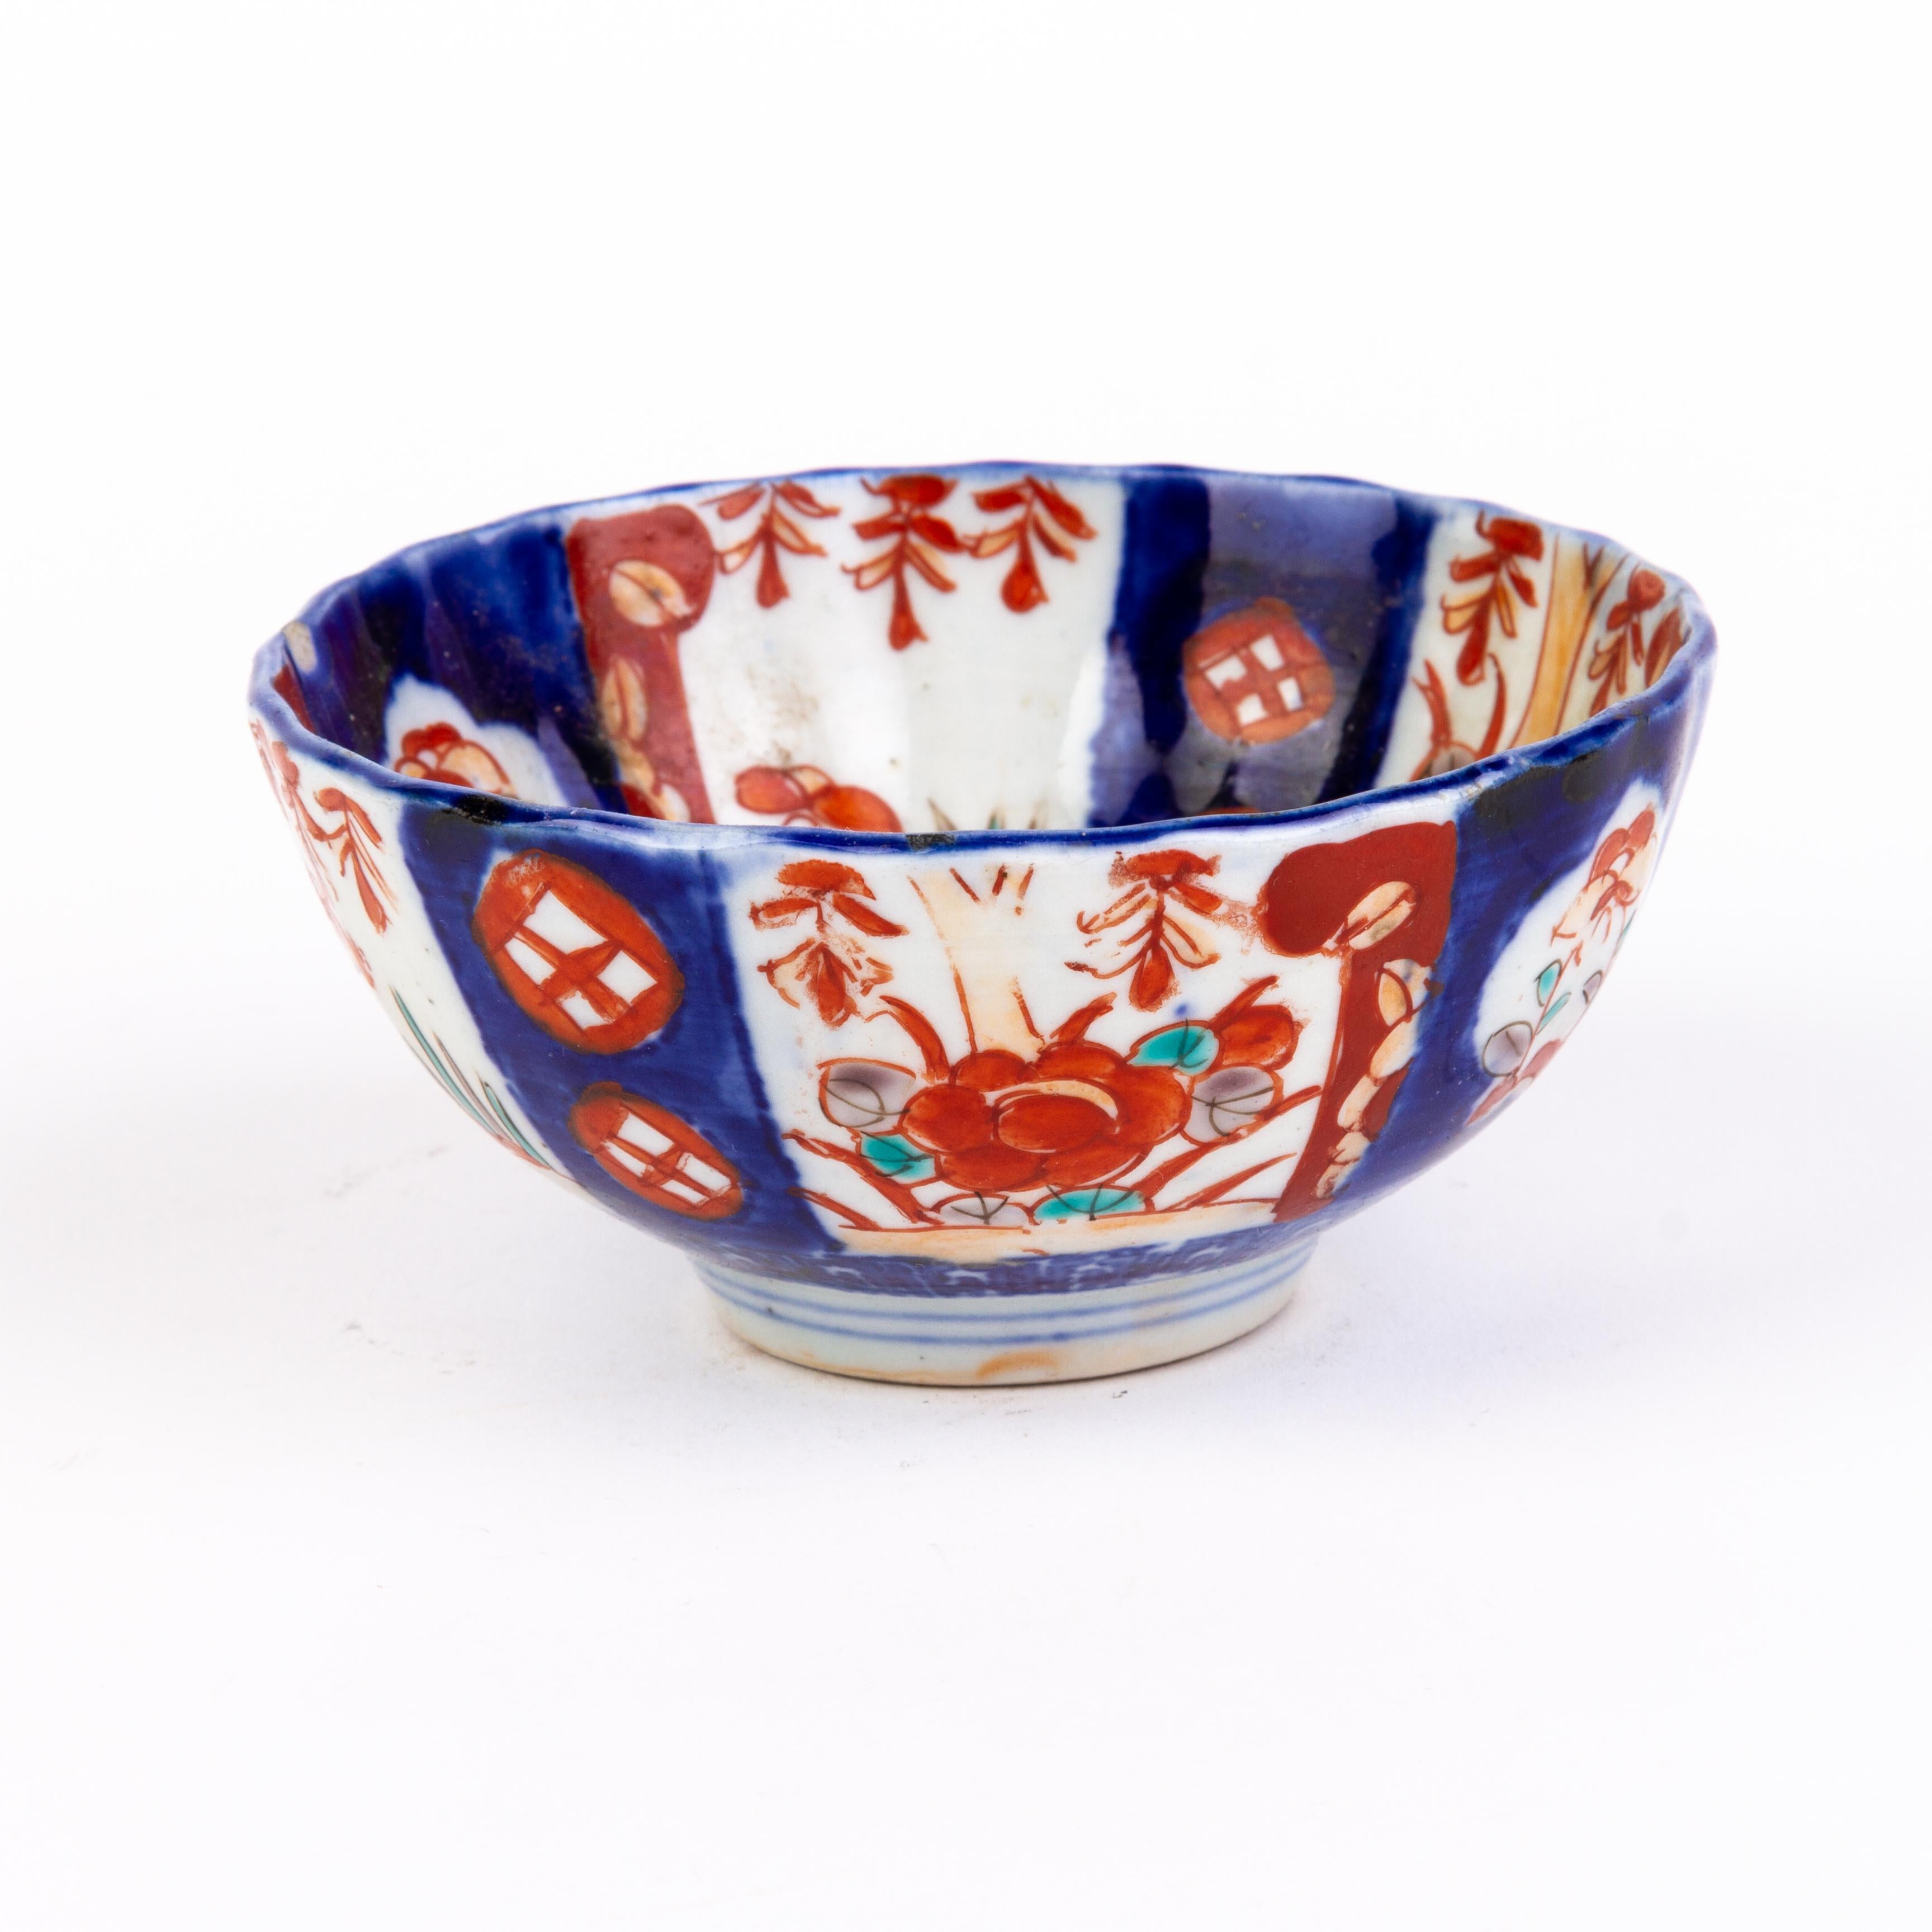 Japanese Imari Fine Hand-Painted Porcelain bowl Meiji 19th Century
Very good condition.
From a private collection.
Free international shipping.